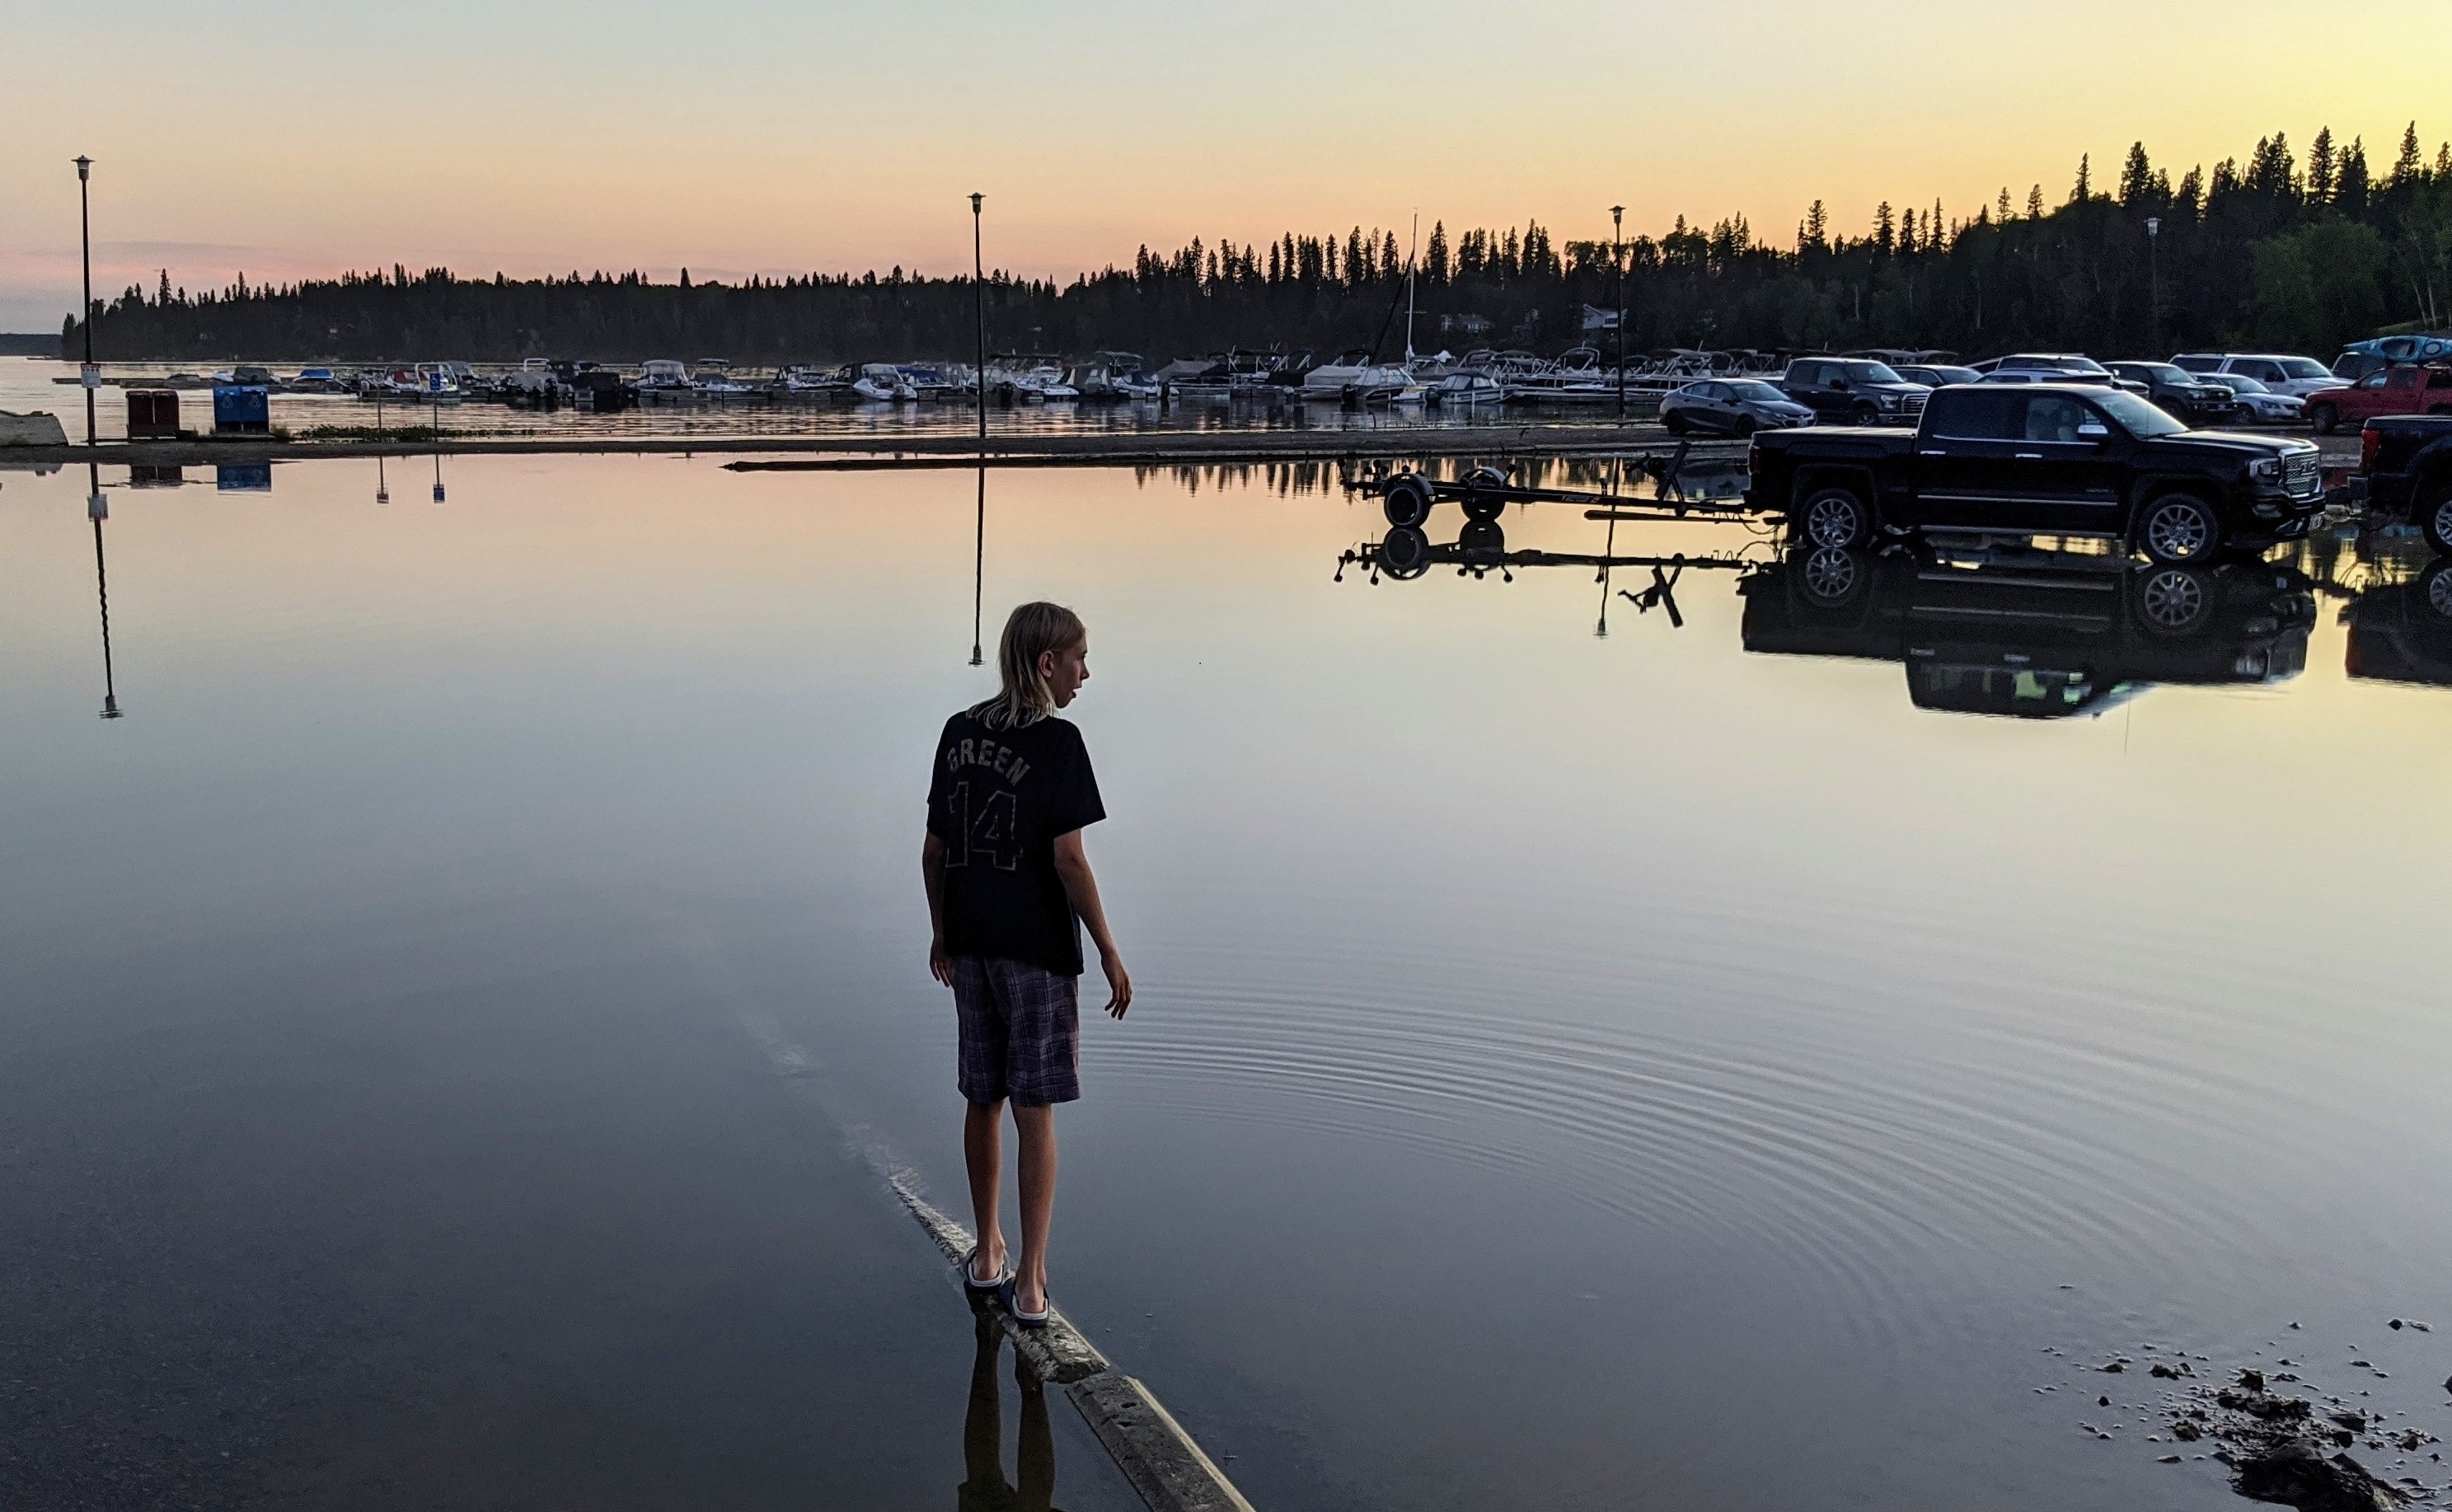 A young boy balances in the shallows of a flood in Paint Lake Provincial Park